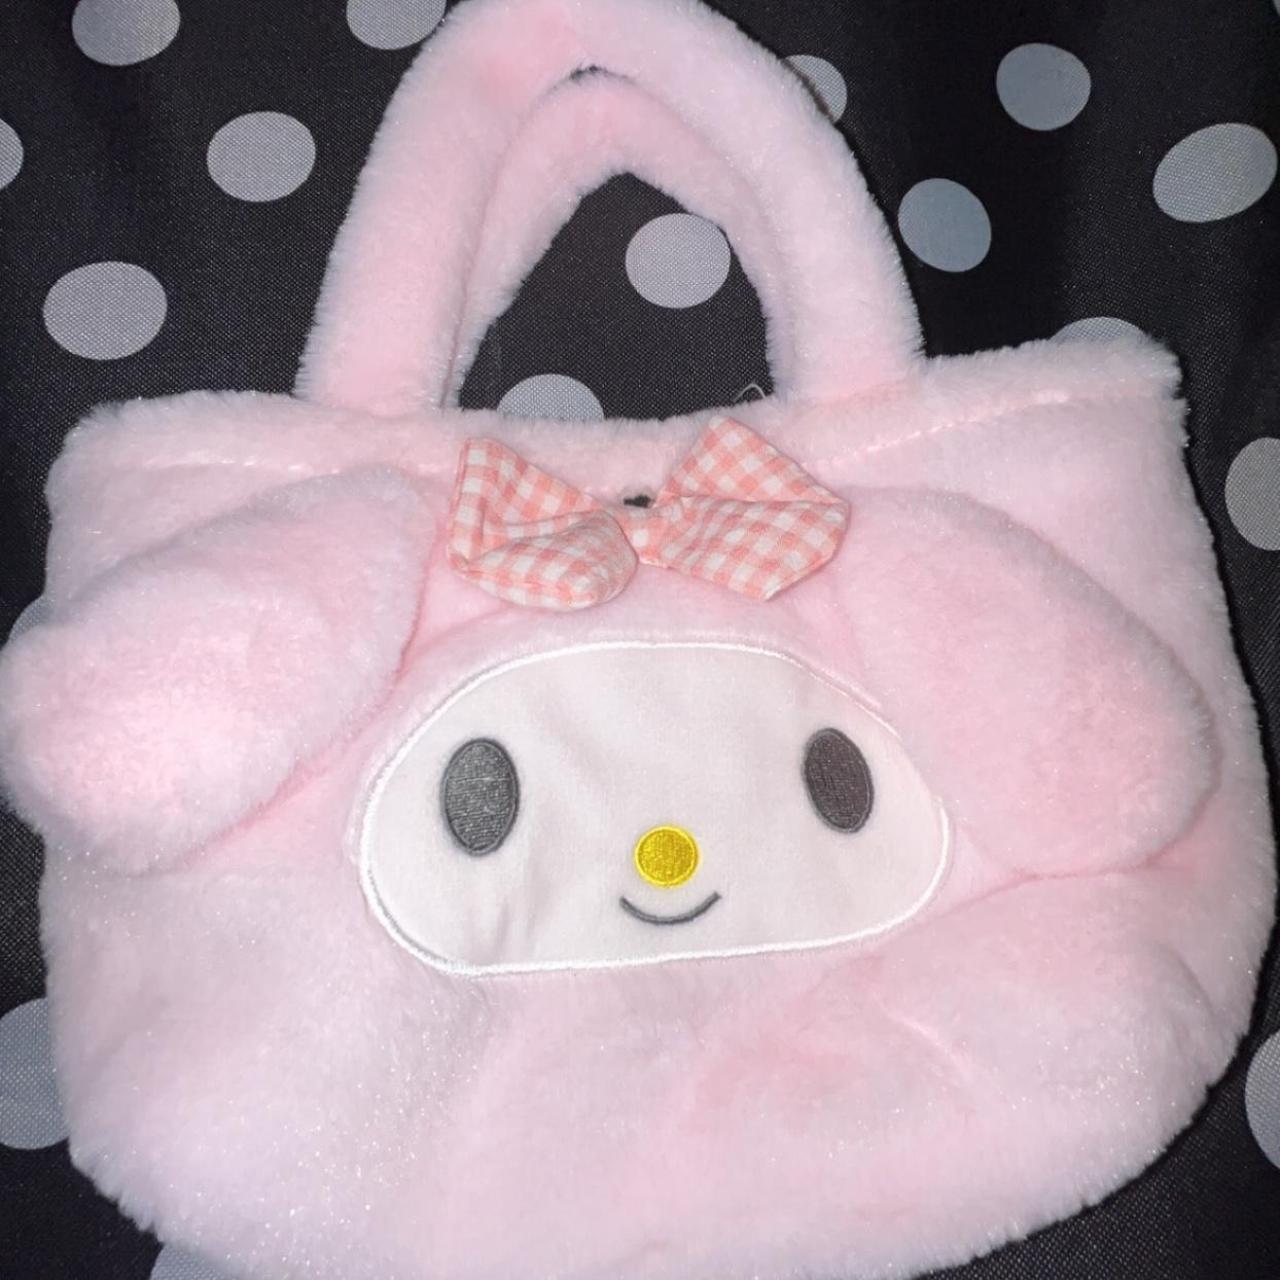 Sanrio Women's Pink and White Bag